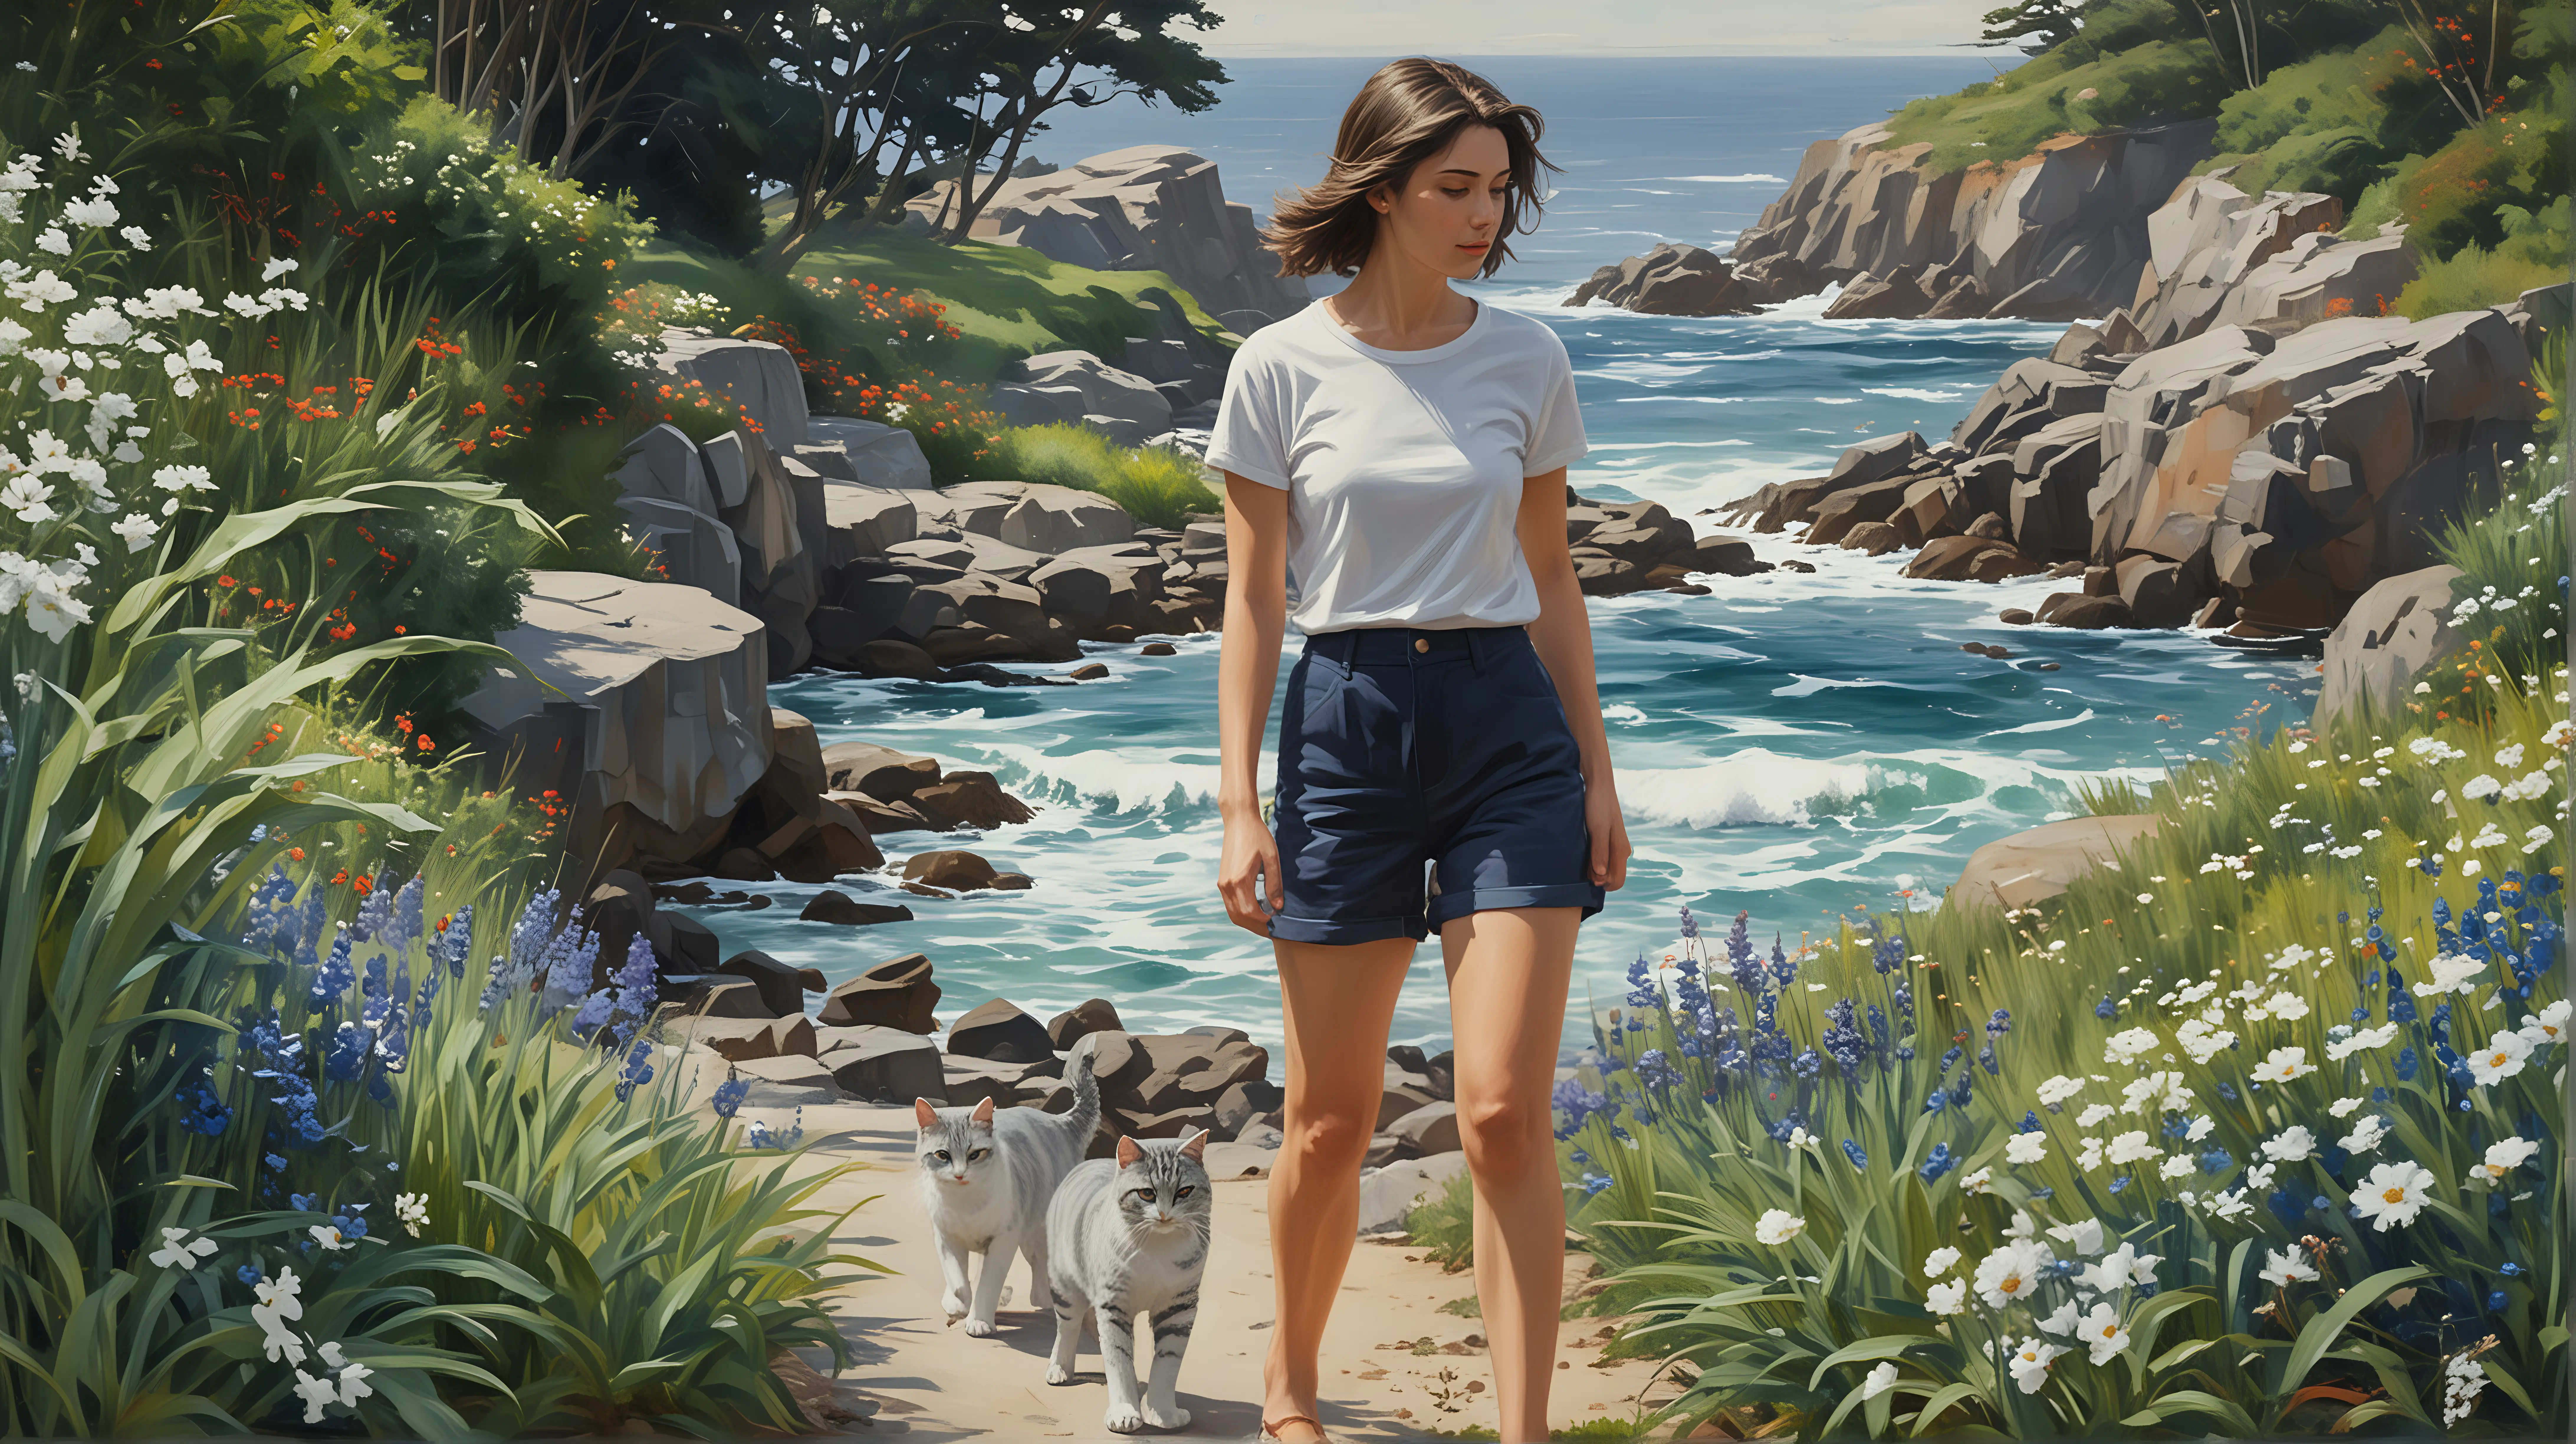 in the style of Charles Courtney Curren, a impressionist painting seen from a distance a woman with shoulder length dark hair dressed in  navy blue bermuda shorts and white t shirt seen from a distance walking through a garden, two gray tabby cats accompany her, depth of field to a glimpse of ocean with Pacific Northwest shore line